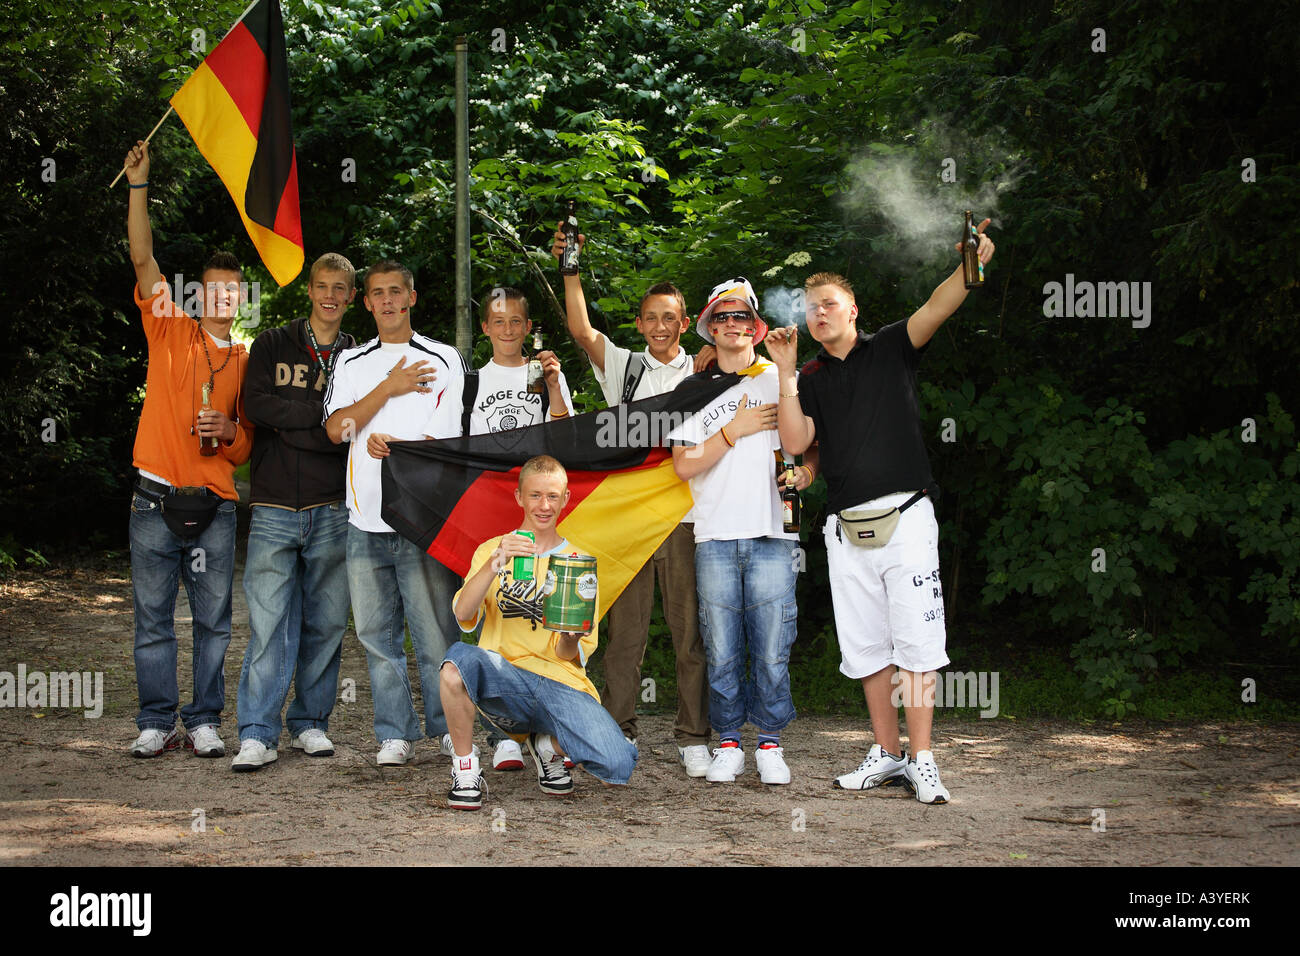 Football supporters in Rostock Germany Stock Photo